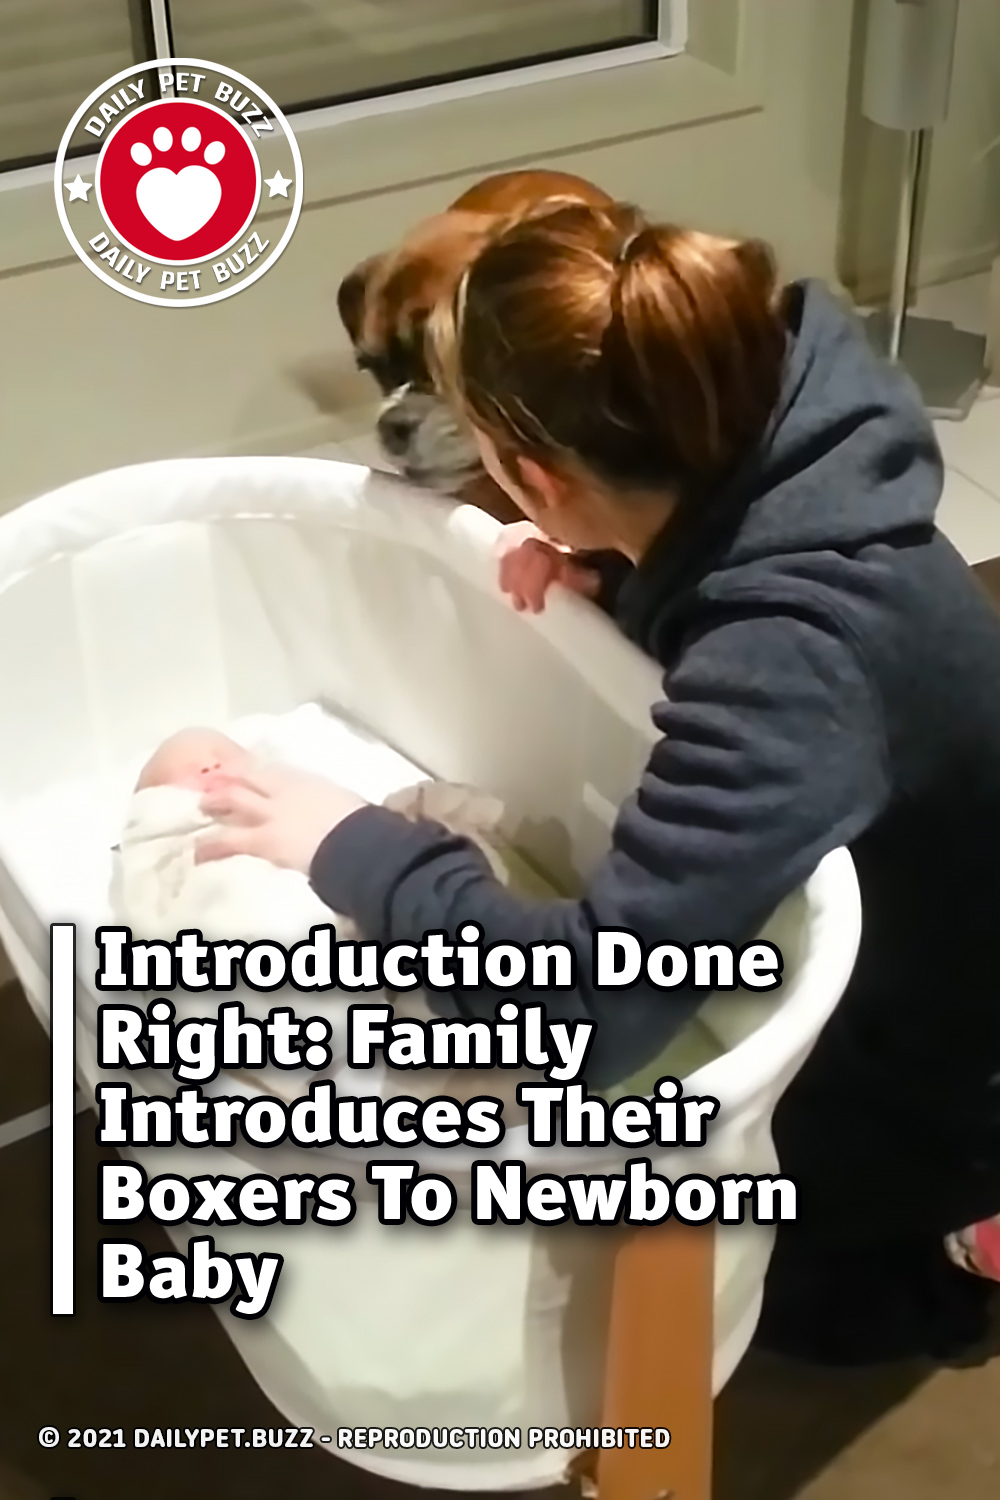 Introduction Done Right: Family Introduces Their Boxers To Newborn Baby